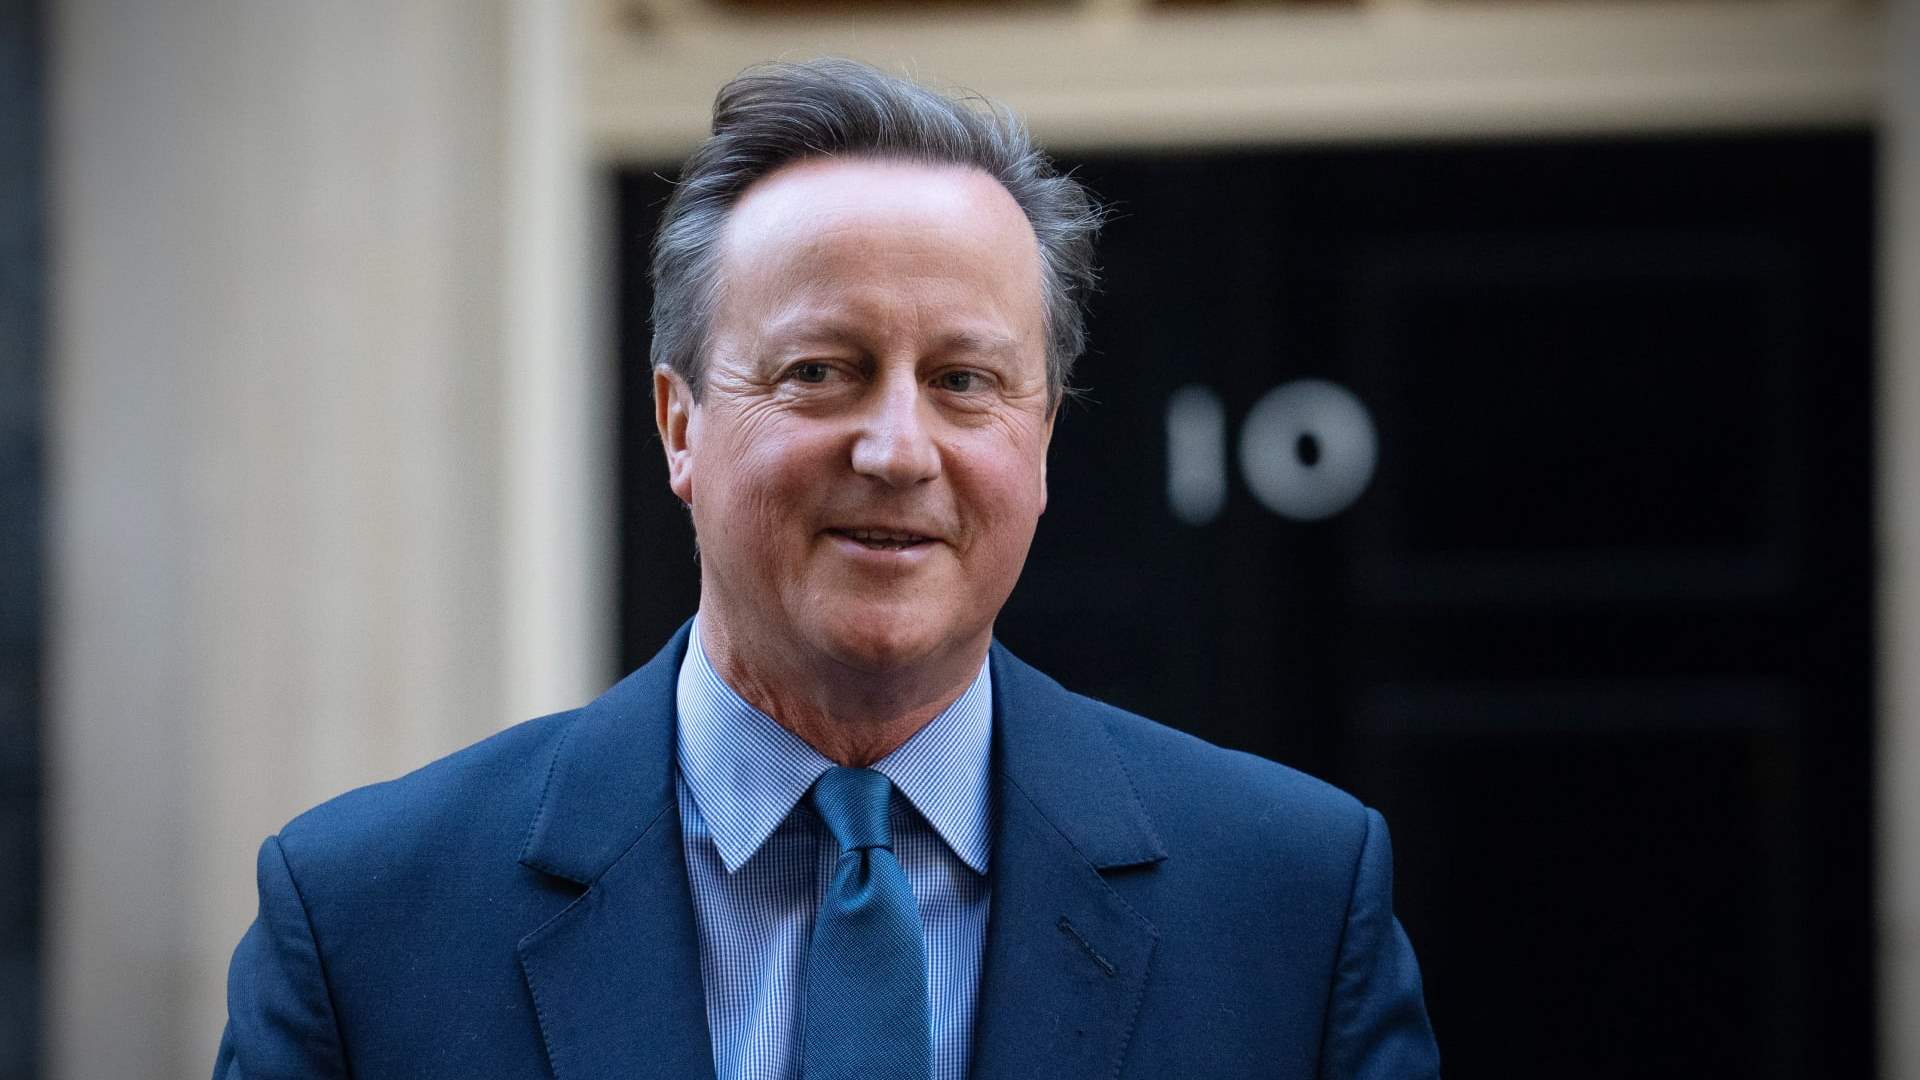 Cameron to Gantz: &#39;No improvement so far&#39; in Gaza and &#39;this must change&#39;